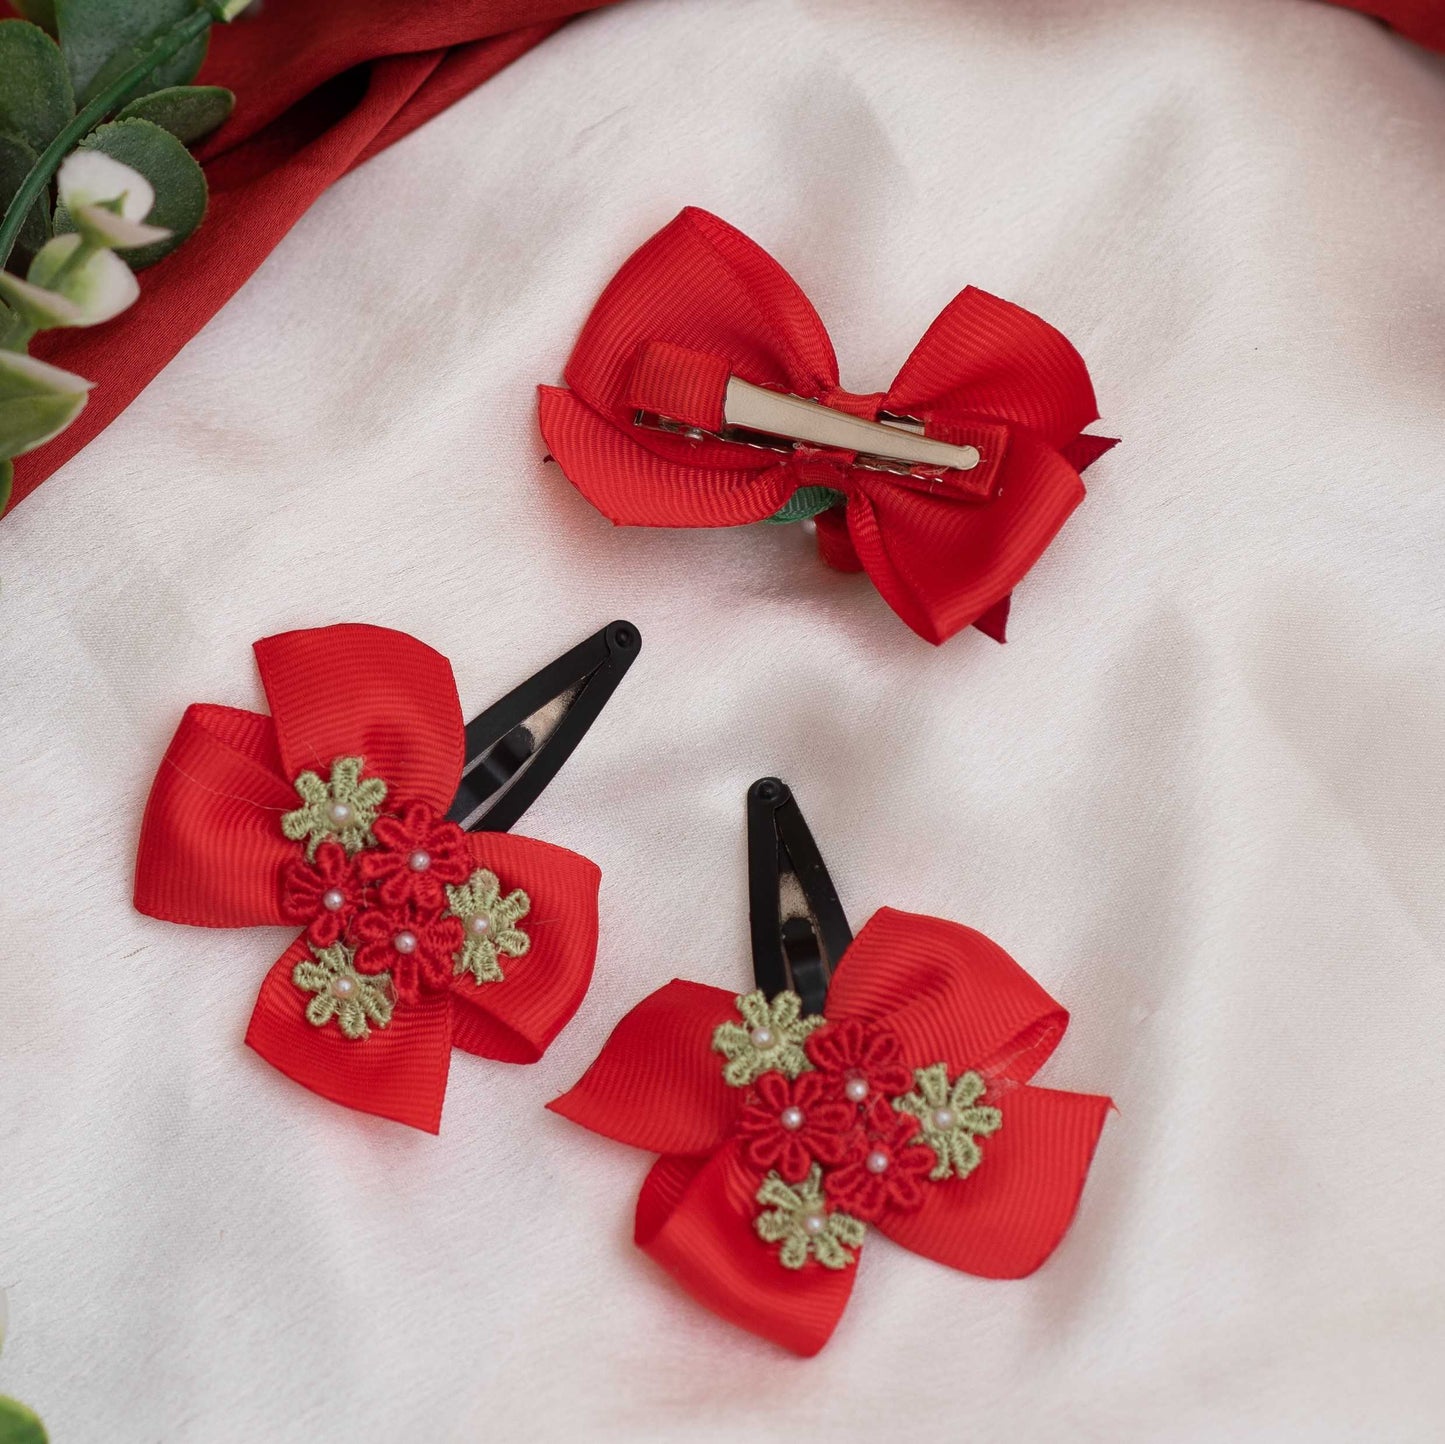 Combo: Fancy bow with felt roses and pearls on alligator clip and cute bow on tic-tac pins with decorate flowers - Red and Green  (Set of 1 pair,  1 single bow - 3 quantity)